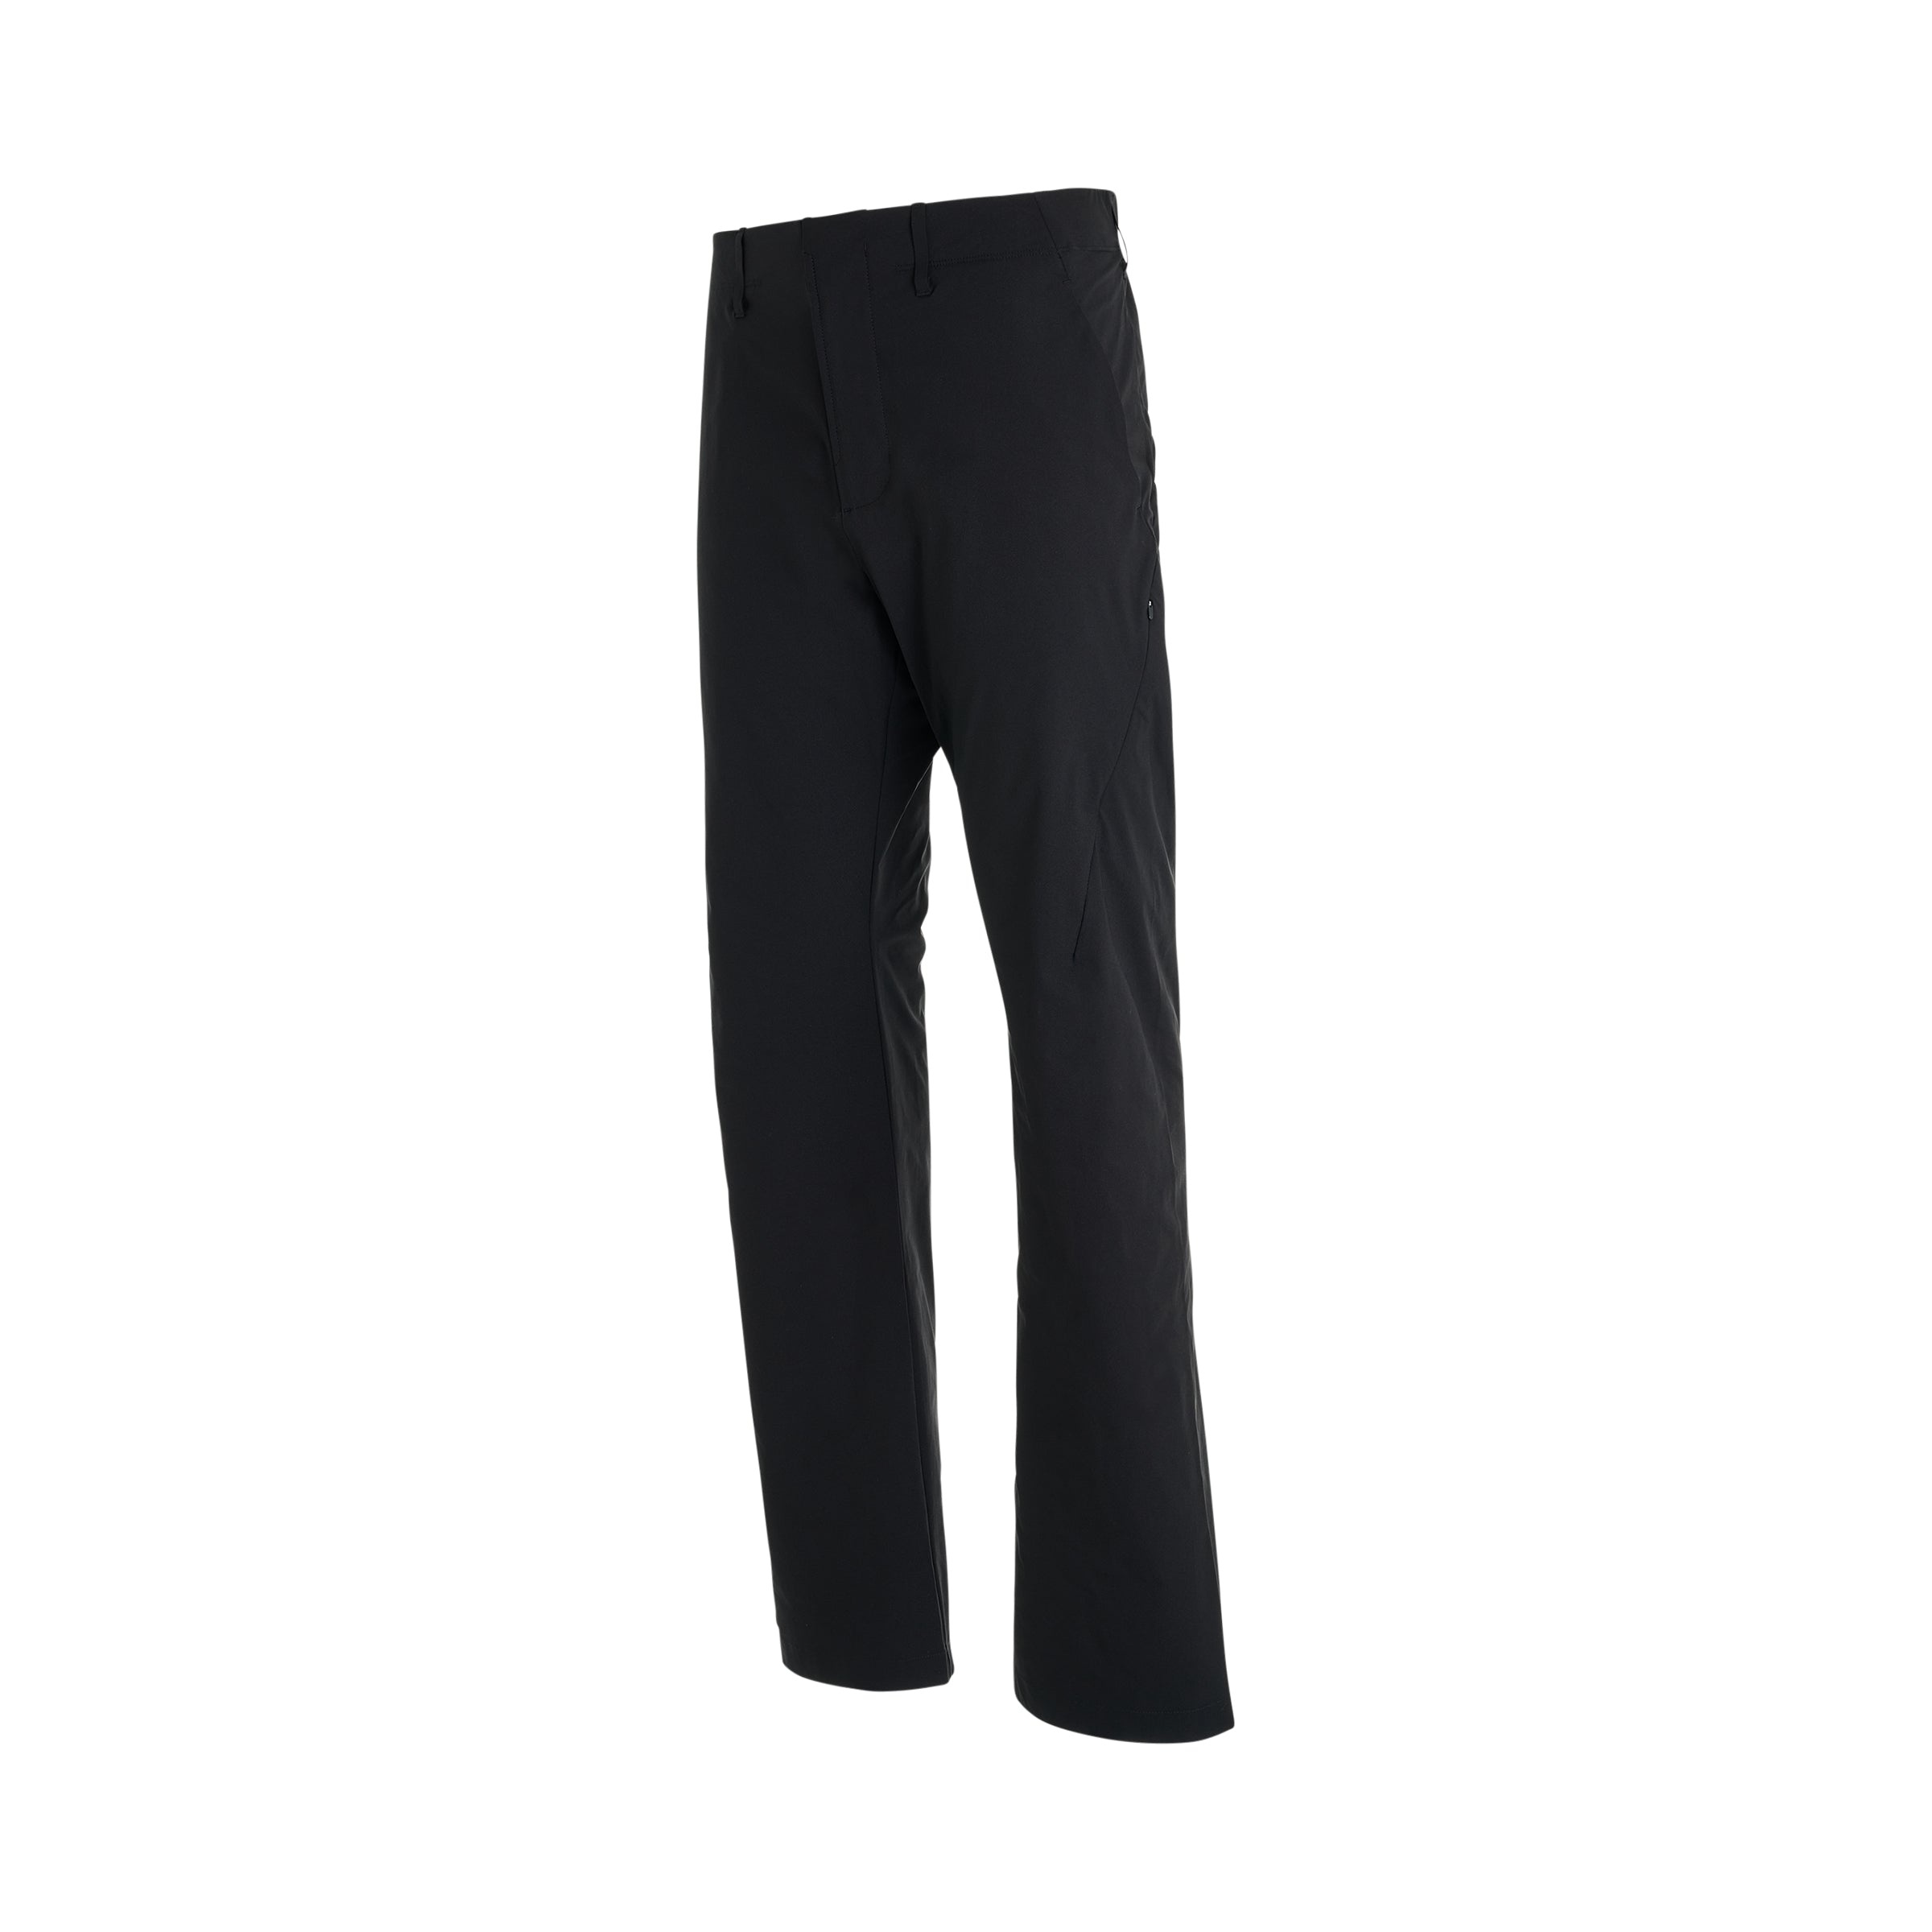 6.0 Technical Pants (Right) in Black - 2